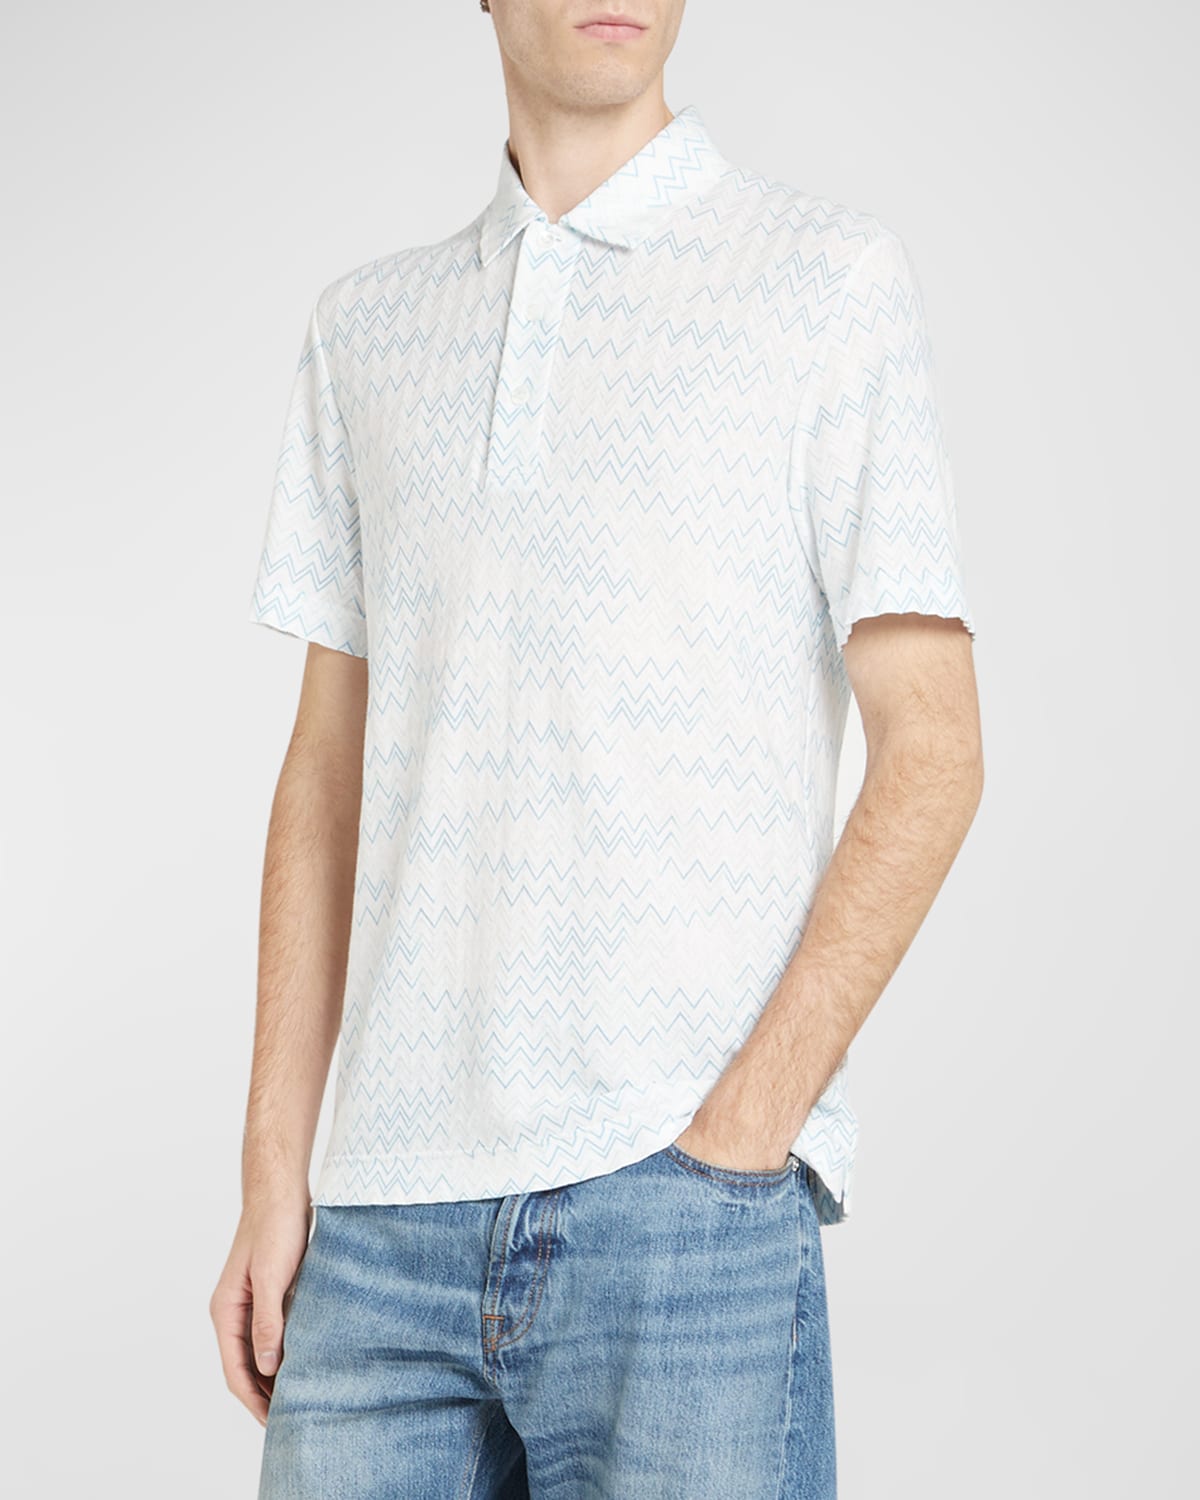 Missoni Men's Sheer Space-dyed Chevron Polo Shirt In White And Turquoi